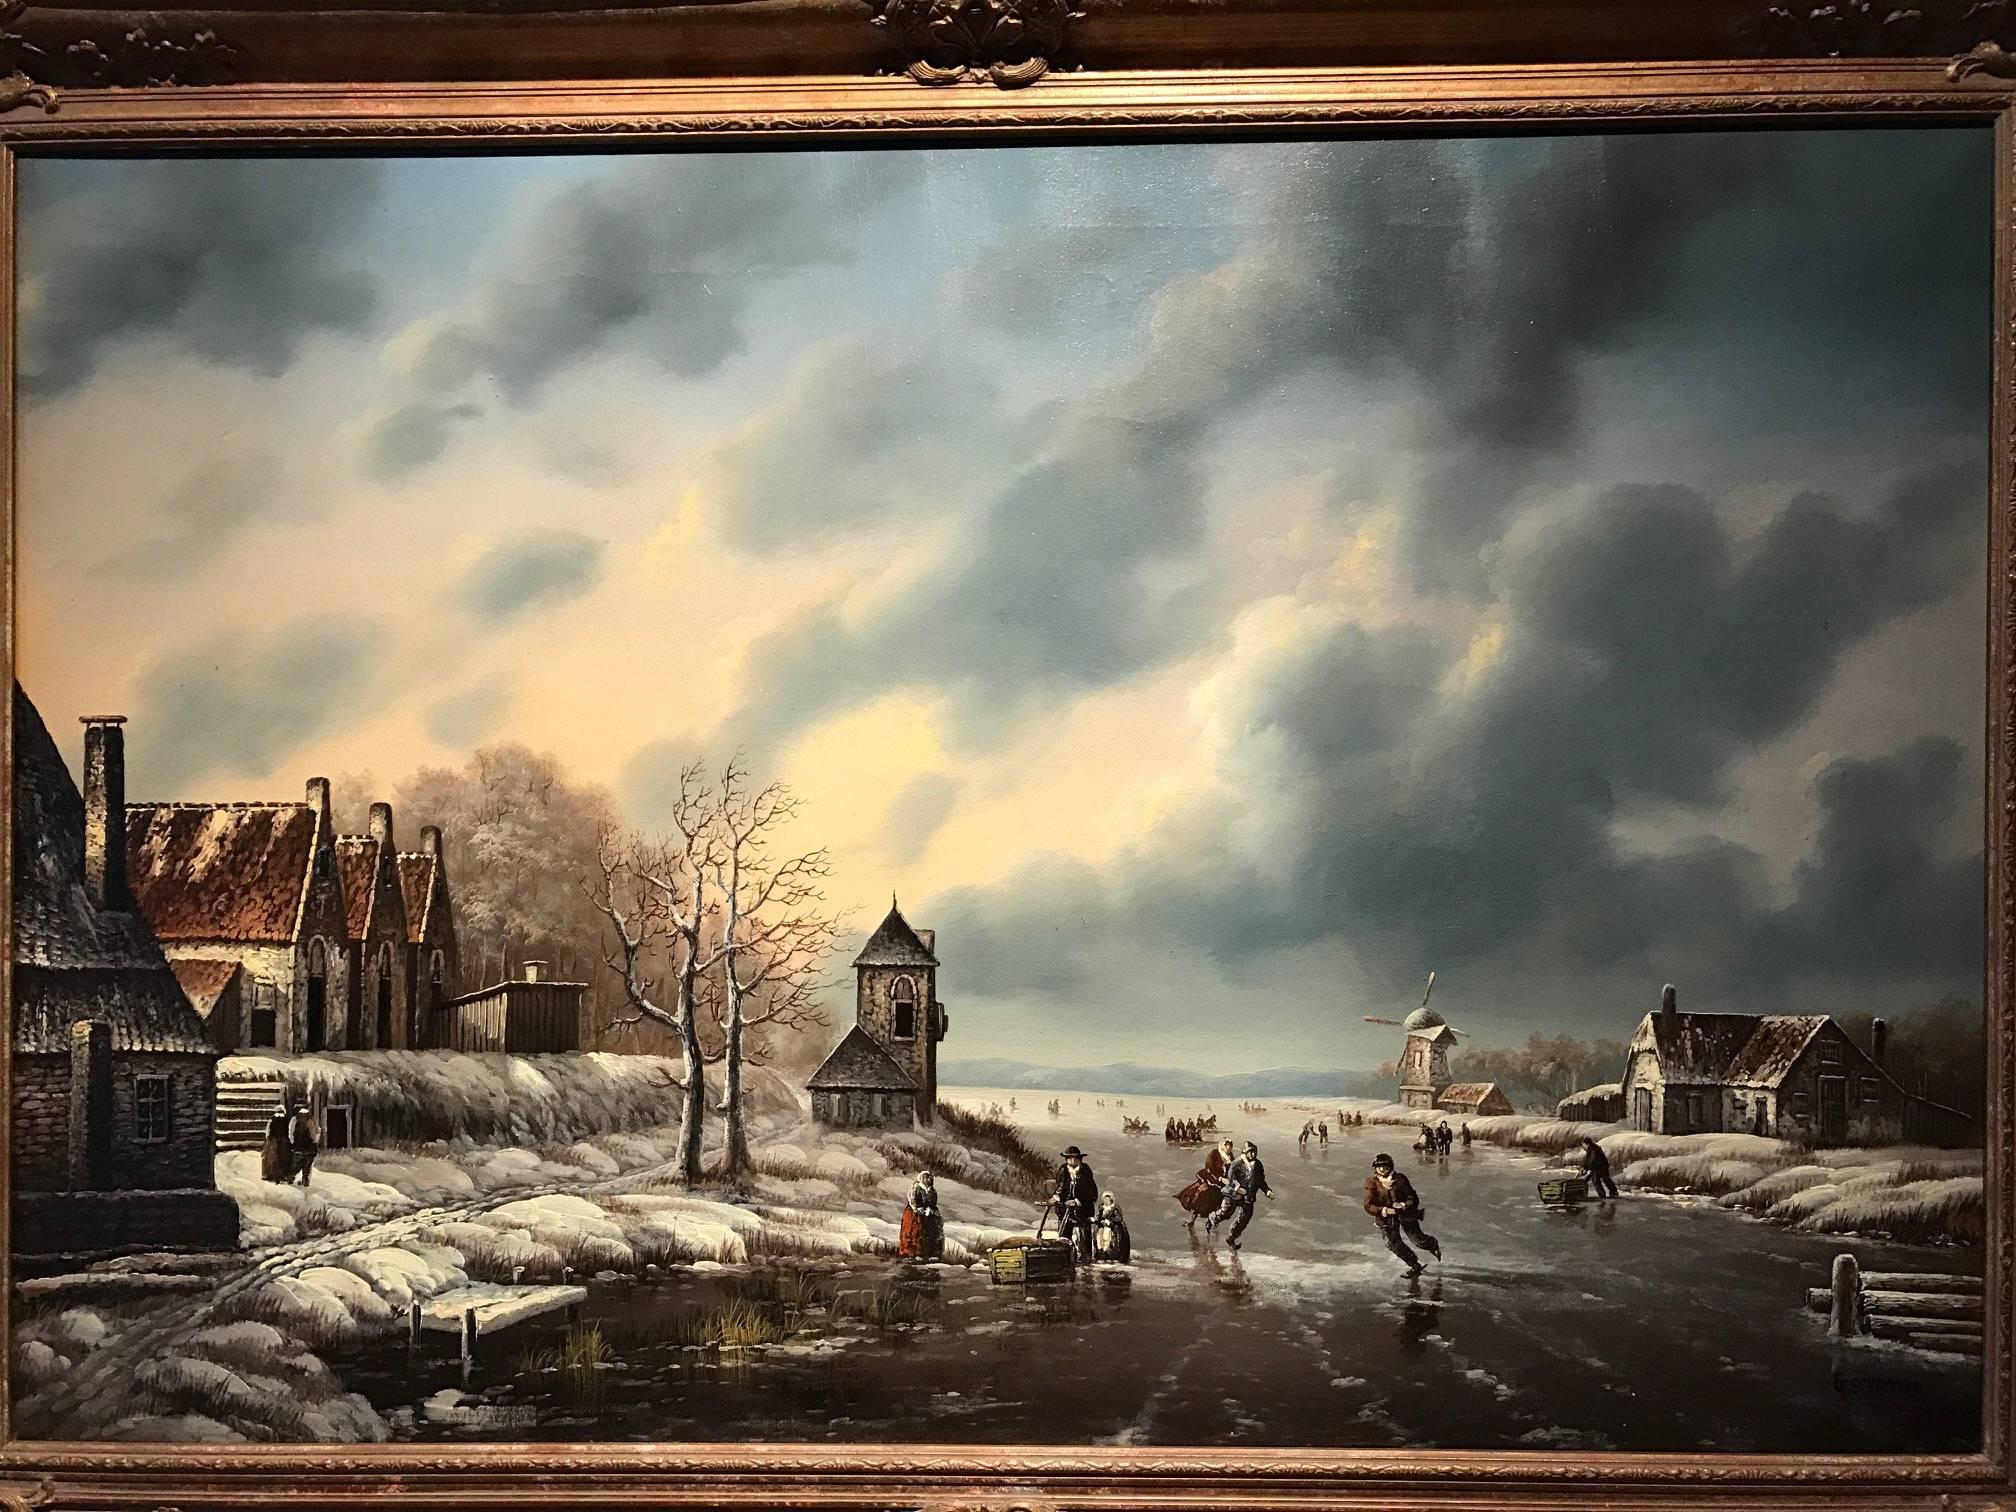 Fine quality large scale Dutch winter scene depicting figures skating on the frozen river as it 'runs' through an old town or village. 

The work is painted on a large scale and beautifully presented in this gallery gilt swept frame. 

The